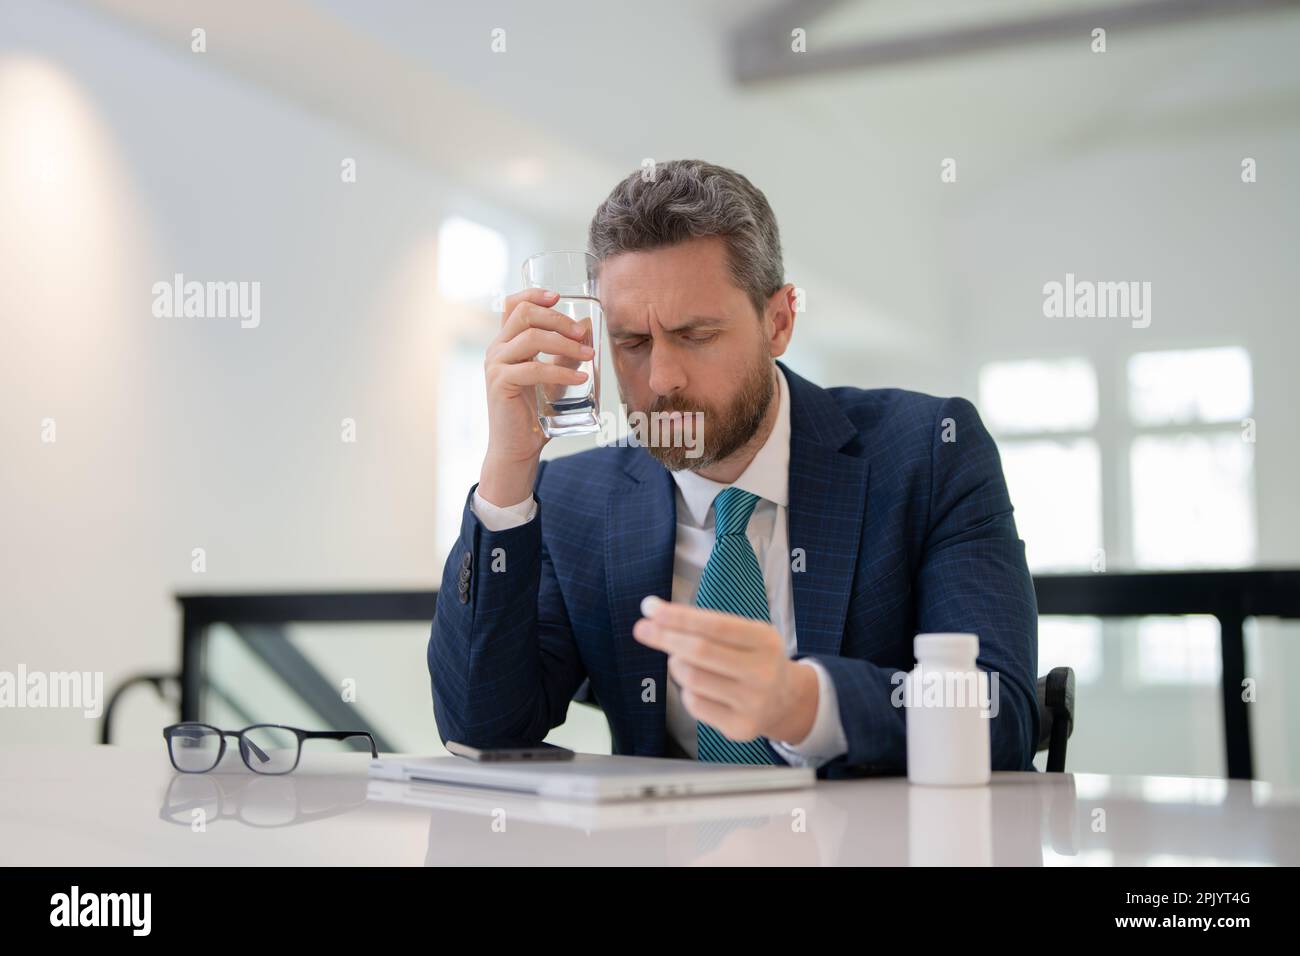 Tired, headache and eye strain from laptop. Businessman with stress, burnout and fatigue eyestrain. Man taking a Medicine pill from headache migraine Stock Photo